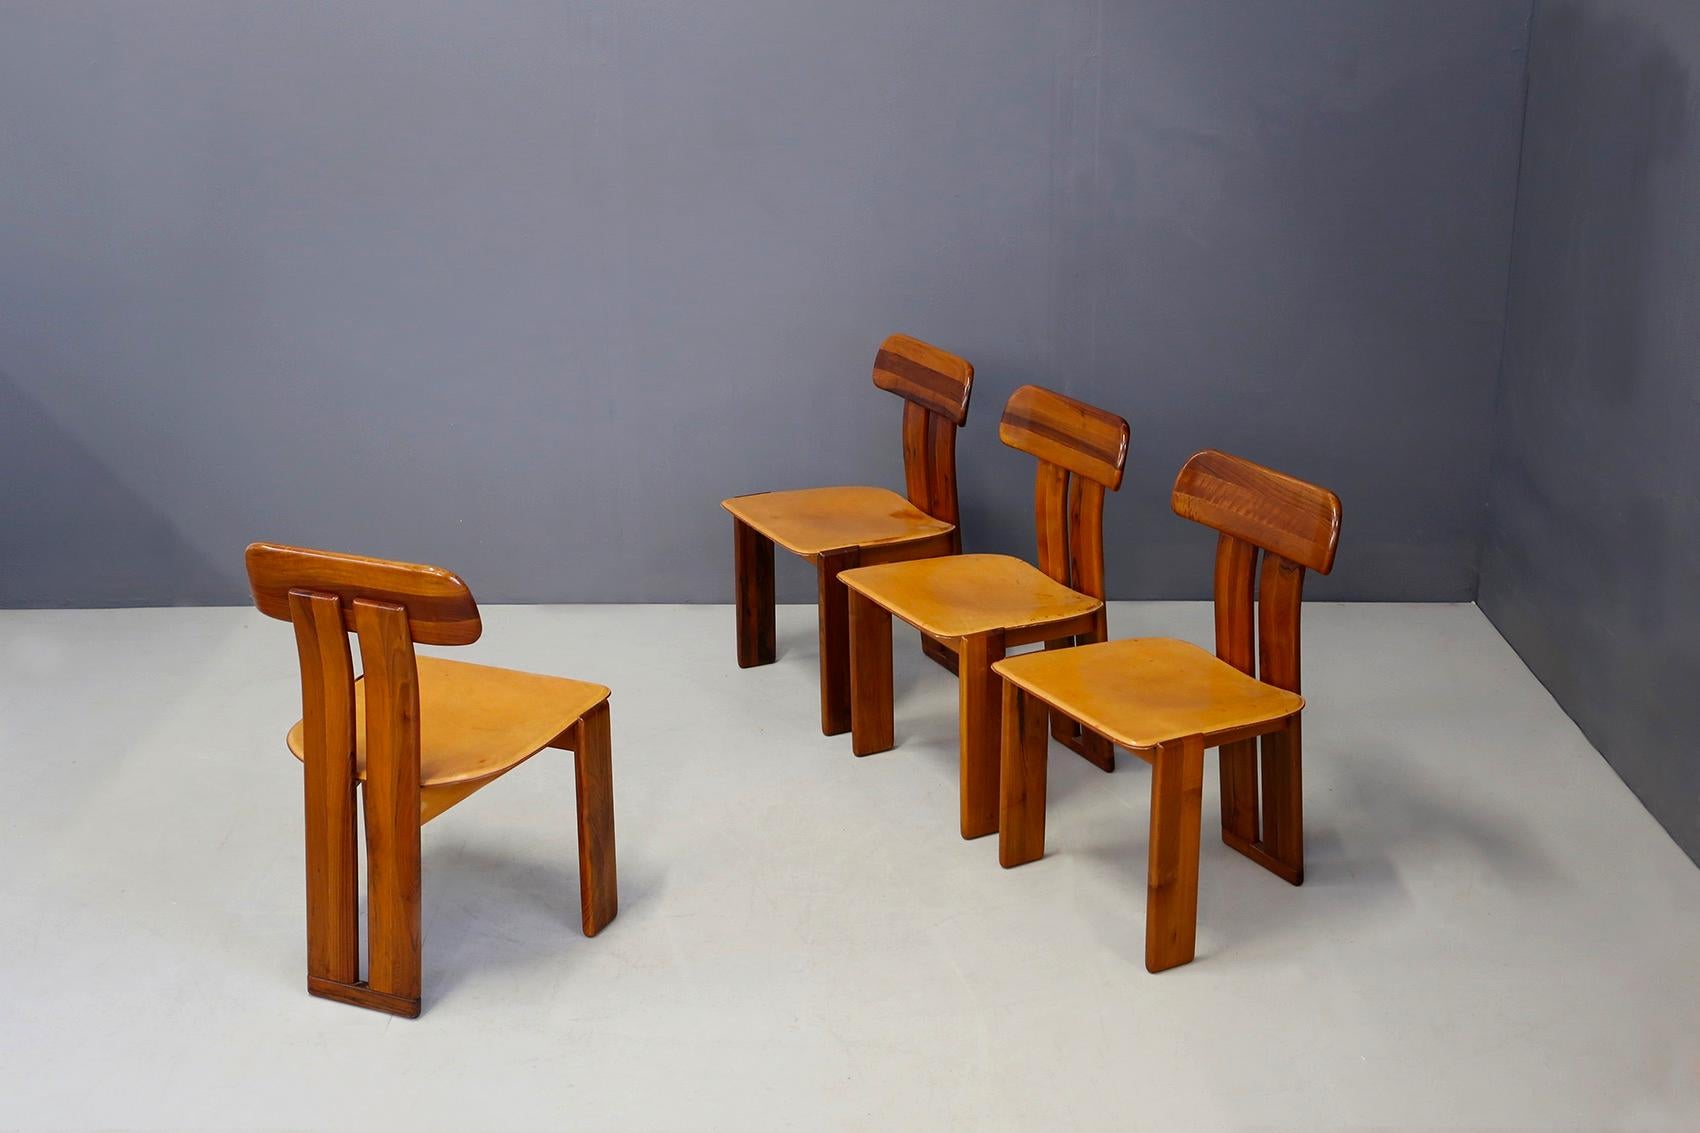 Sapporo for Mobil Girgi, four dining chairs in walnut and beige leather, 1970s.
Set of four sculptural chairs with semi-curved wooden backrests, composed of two vertical slats spaced one from the other. The front legs are straight and consist of two